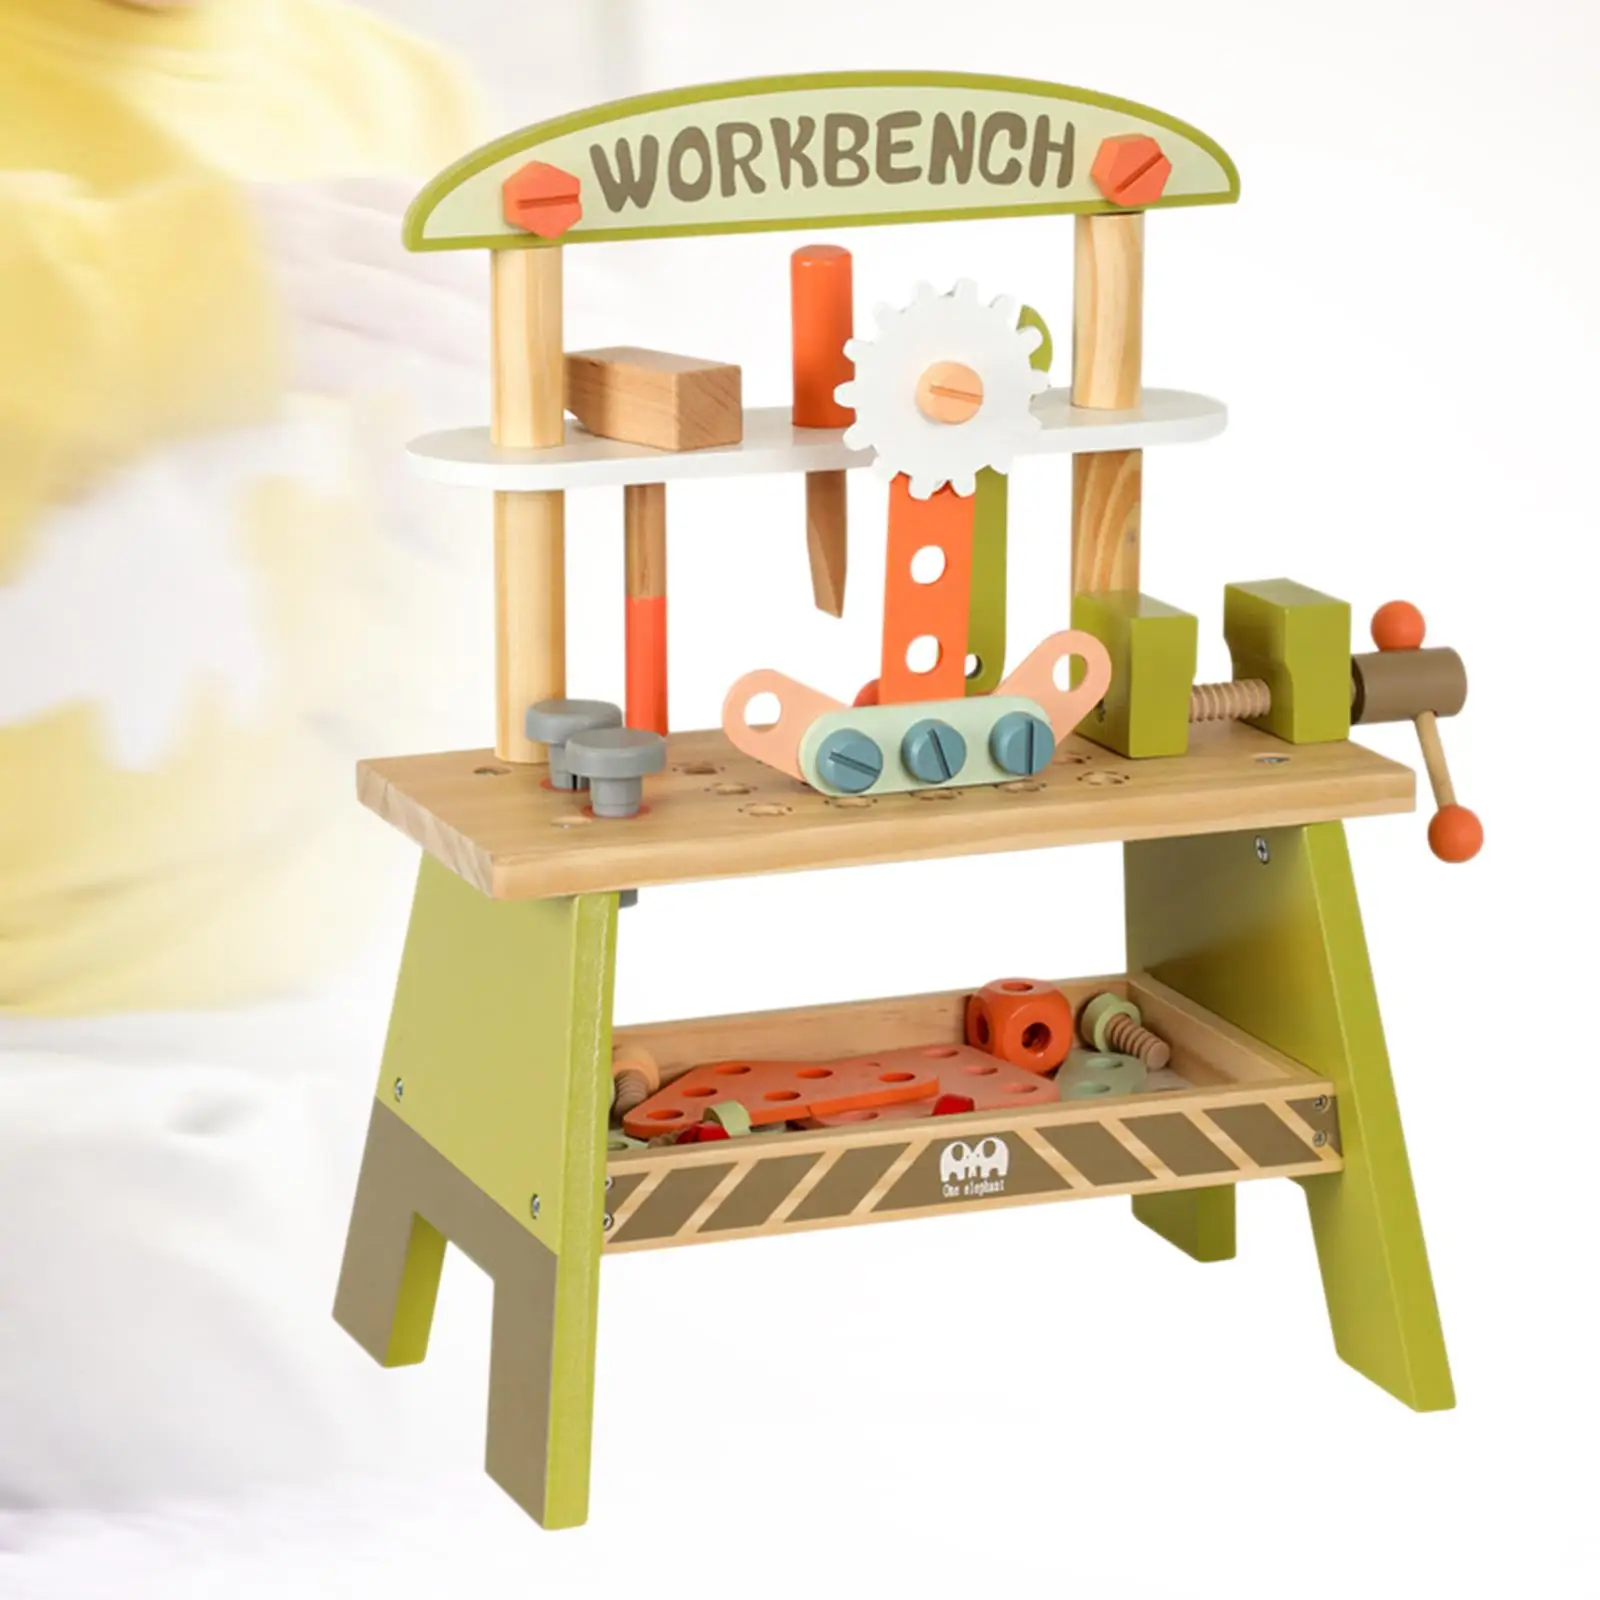 Kid`s Wooden Tool Bench Toy Creative Simulation DIY Durable Pretend Play Construction Toy for 2 3 4 5 Years Old Easy to Assemble